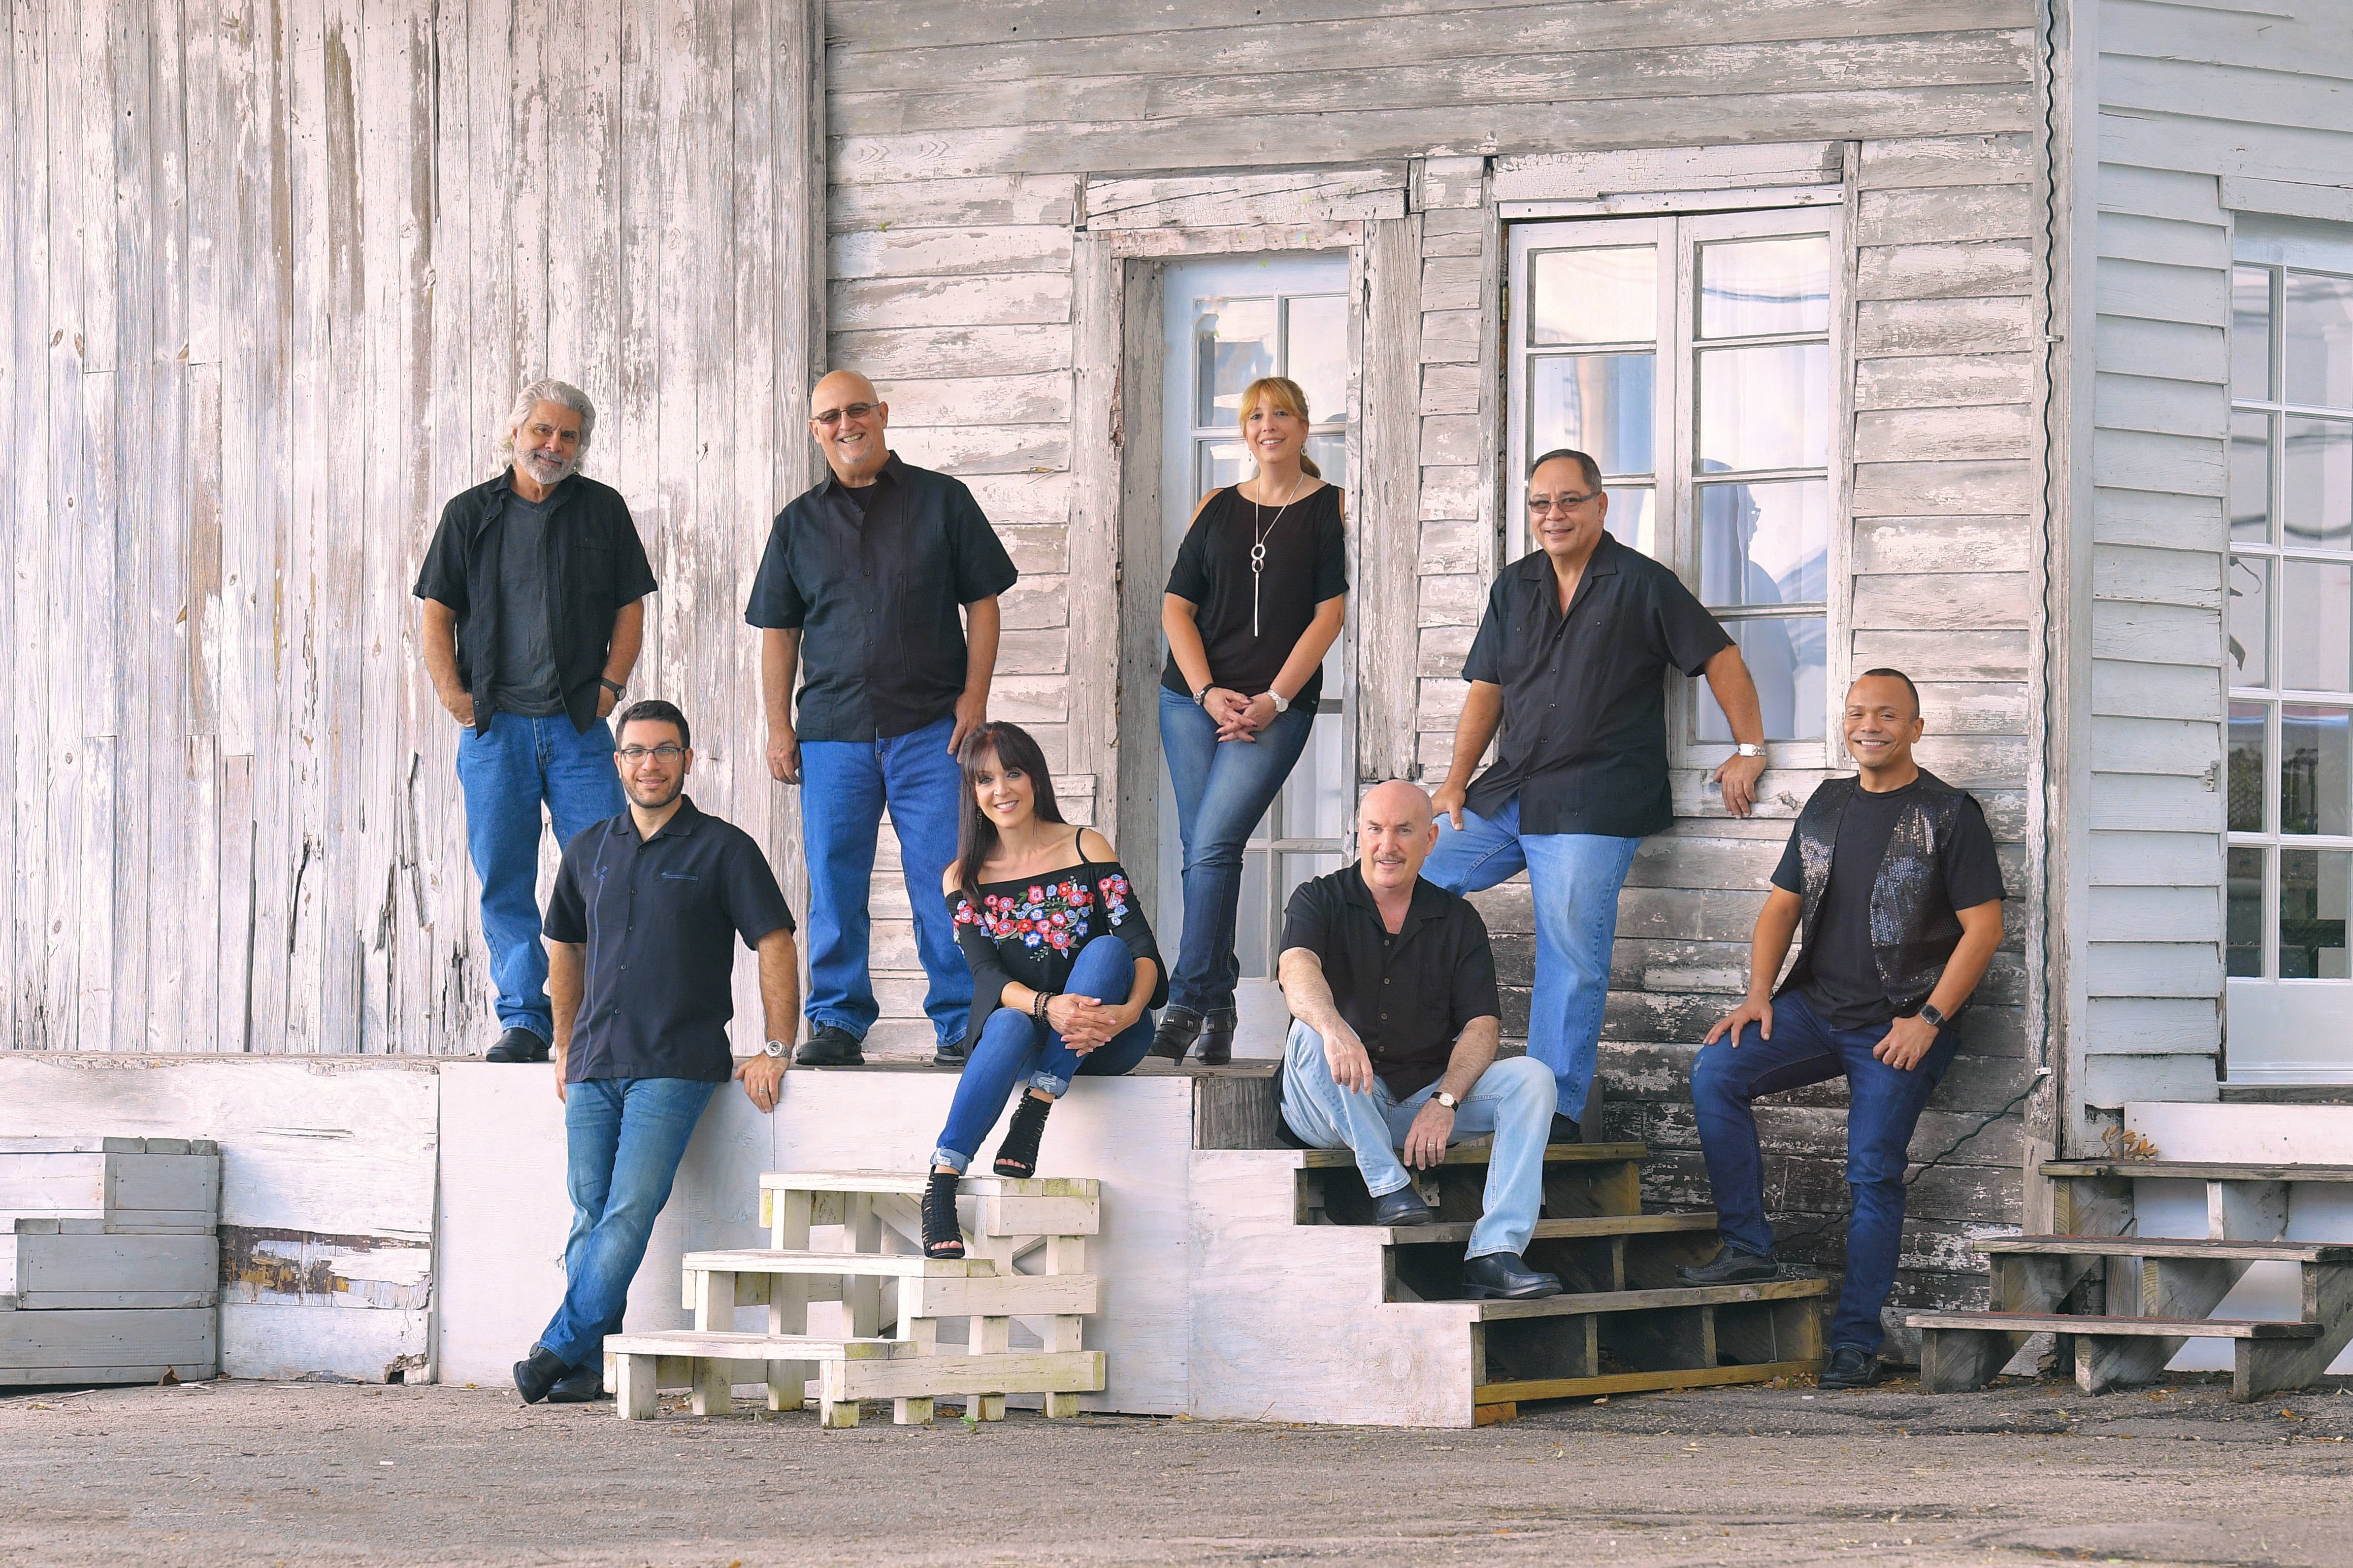 Top of the World -  A Tribute to the Carpenters in Hagerstown promo photo for Period presale offer code